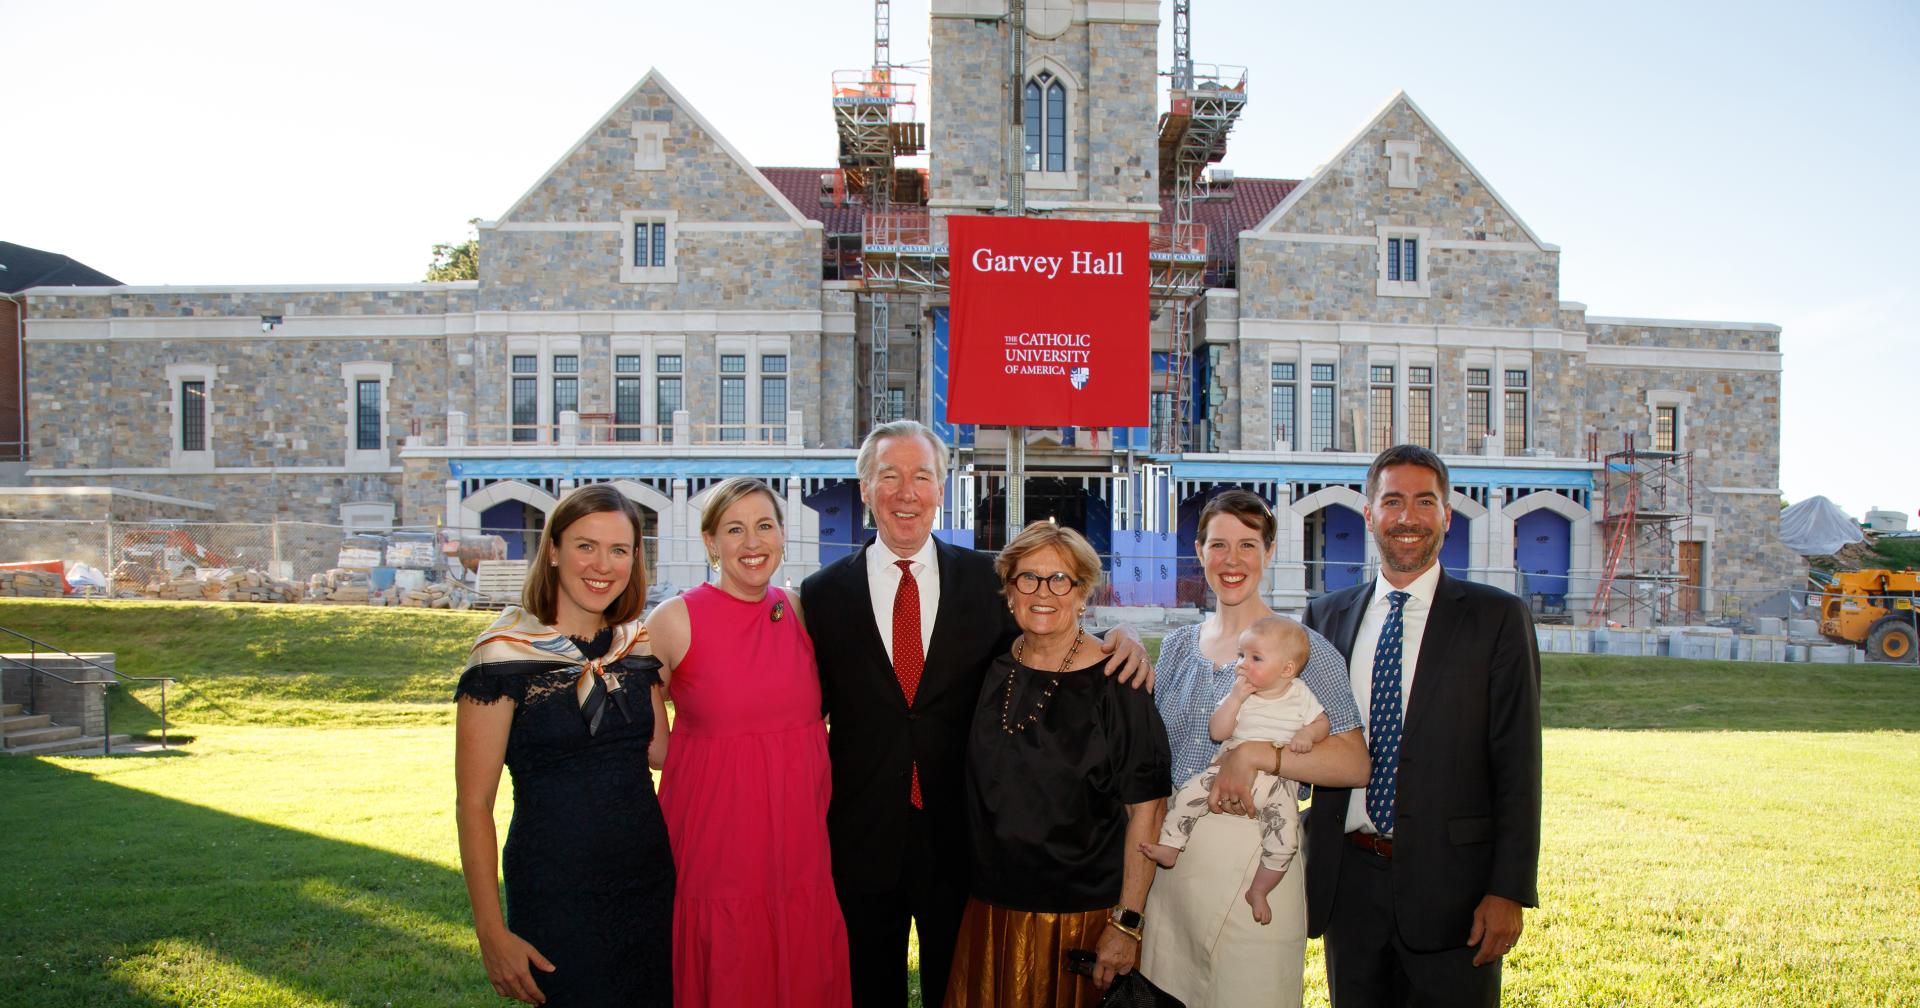 John and Jeanne Garvey with family members in front of Garvey Hall